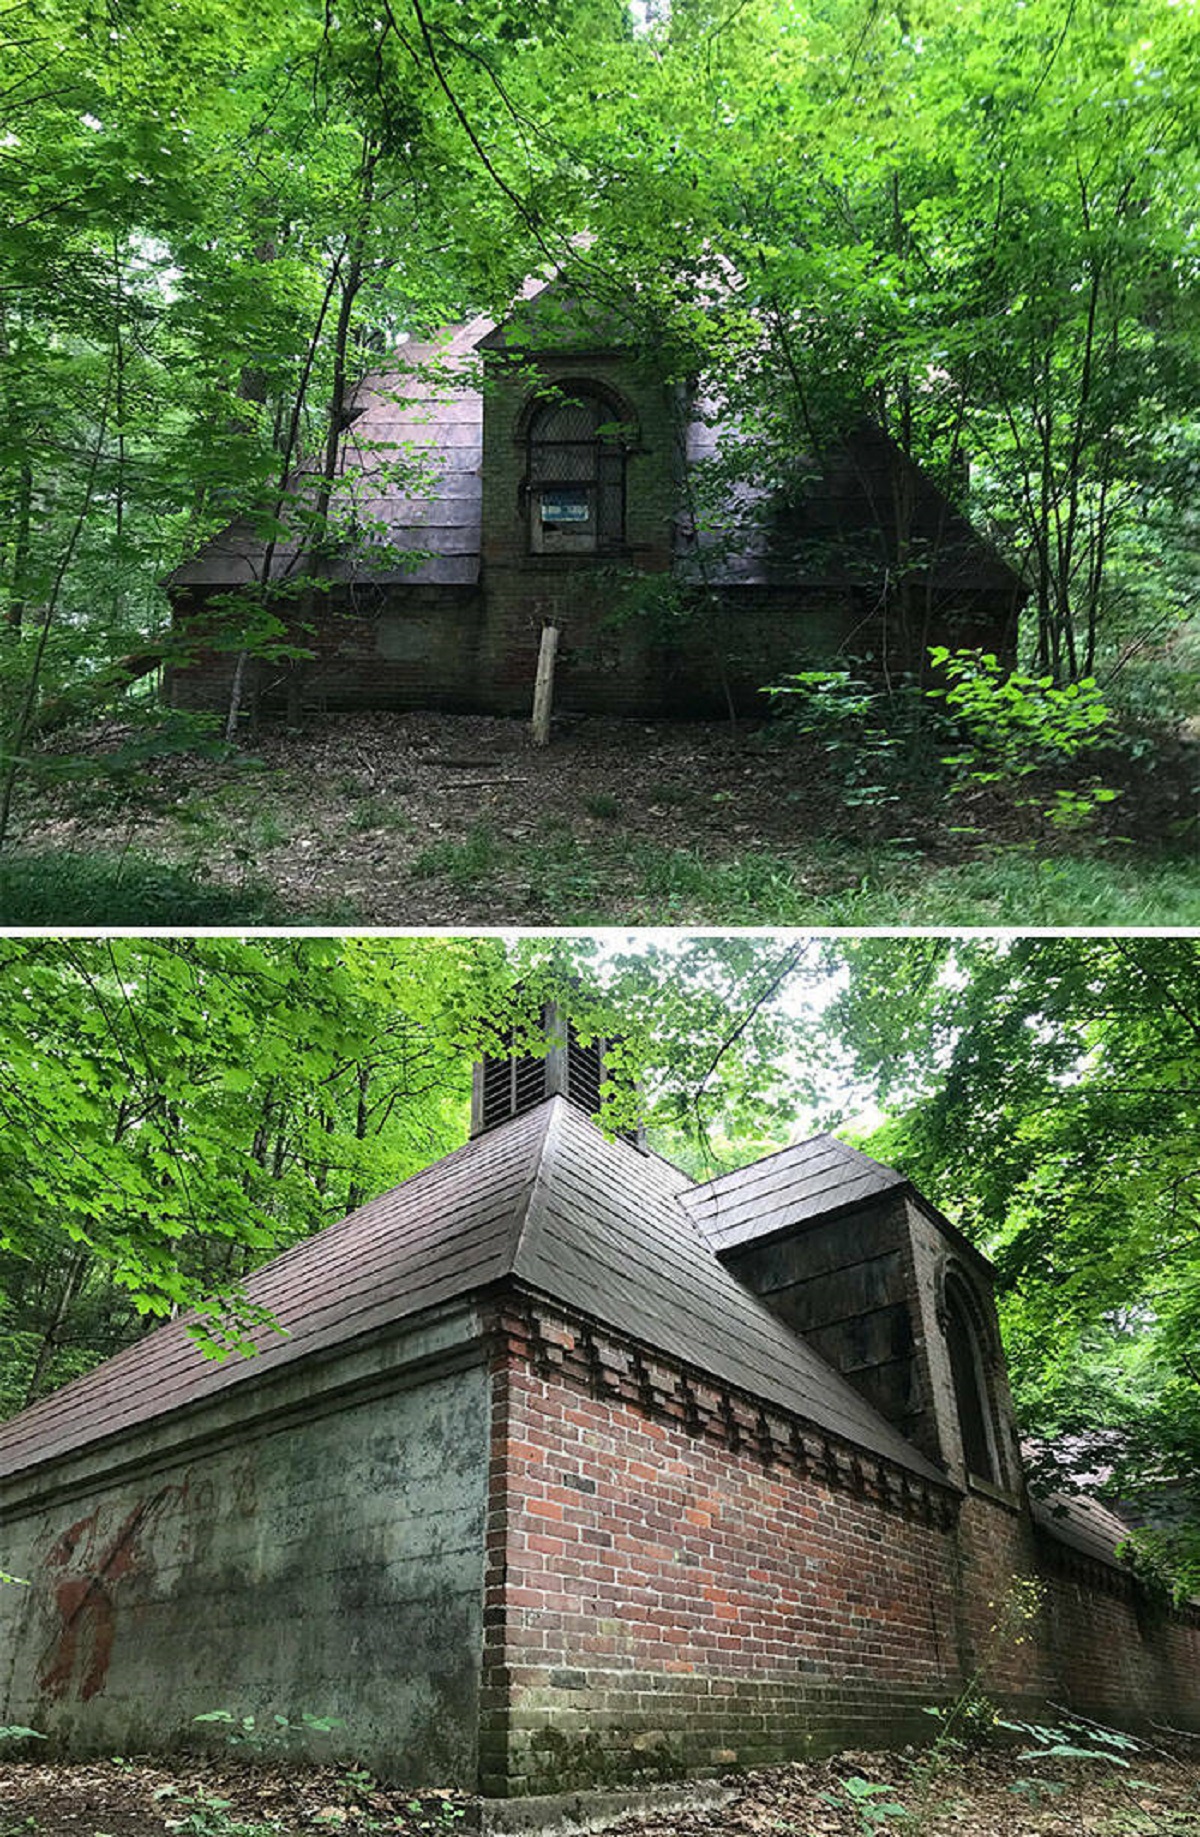 "Came Across This Abandoned Building In Vermont While Hiking In The Woods. There’s No Door And The Windows Have Been Boarded Up And Caged"